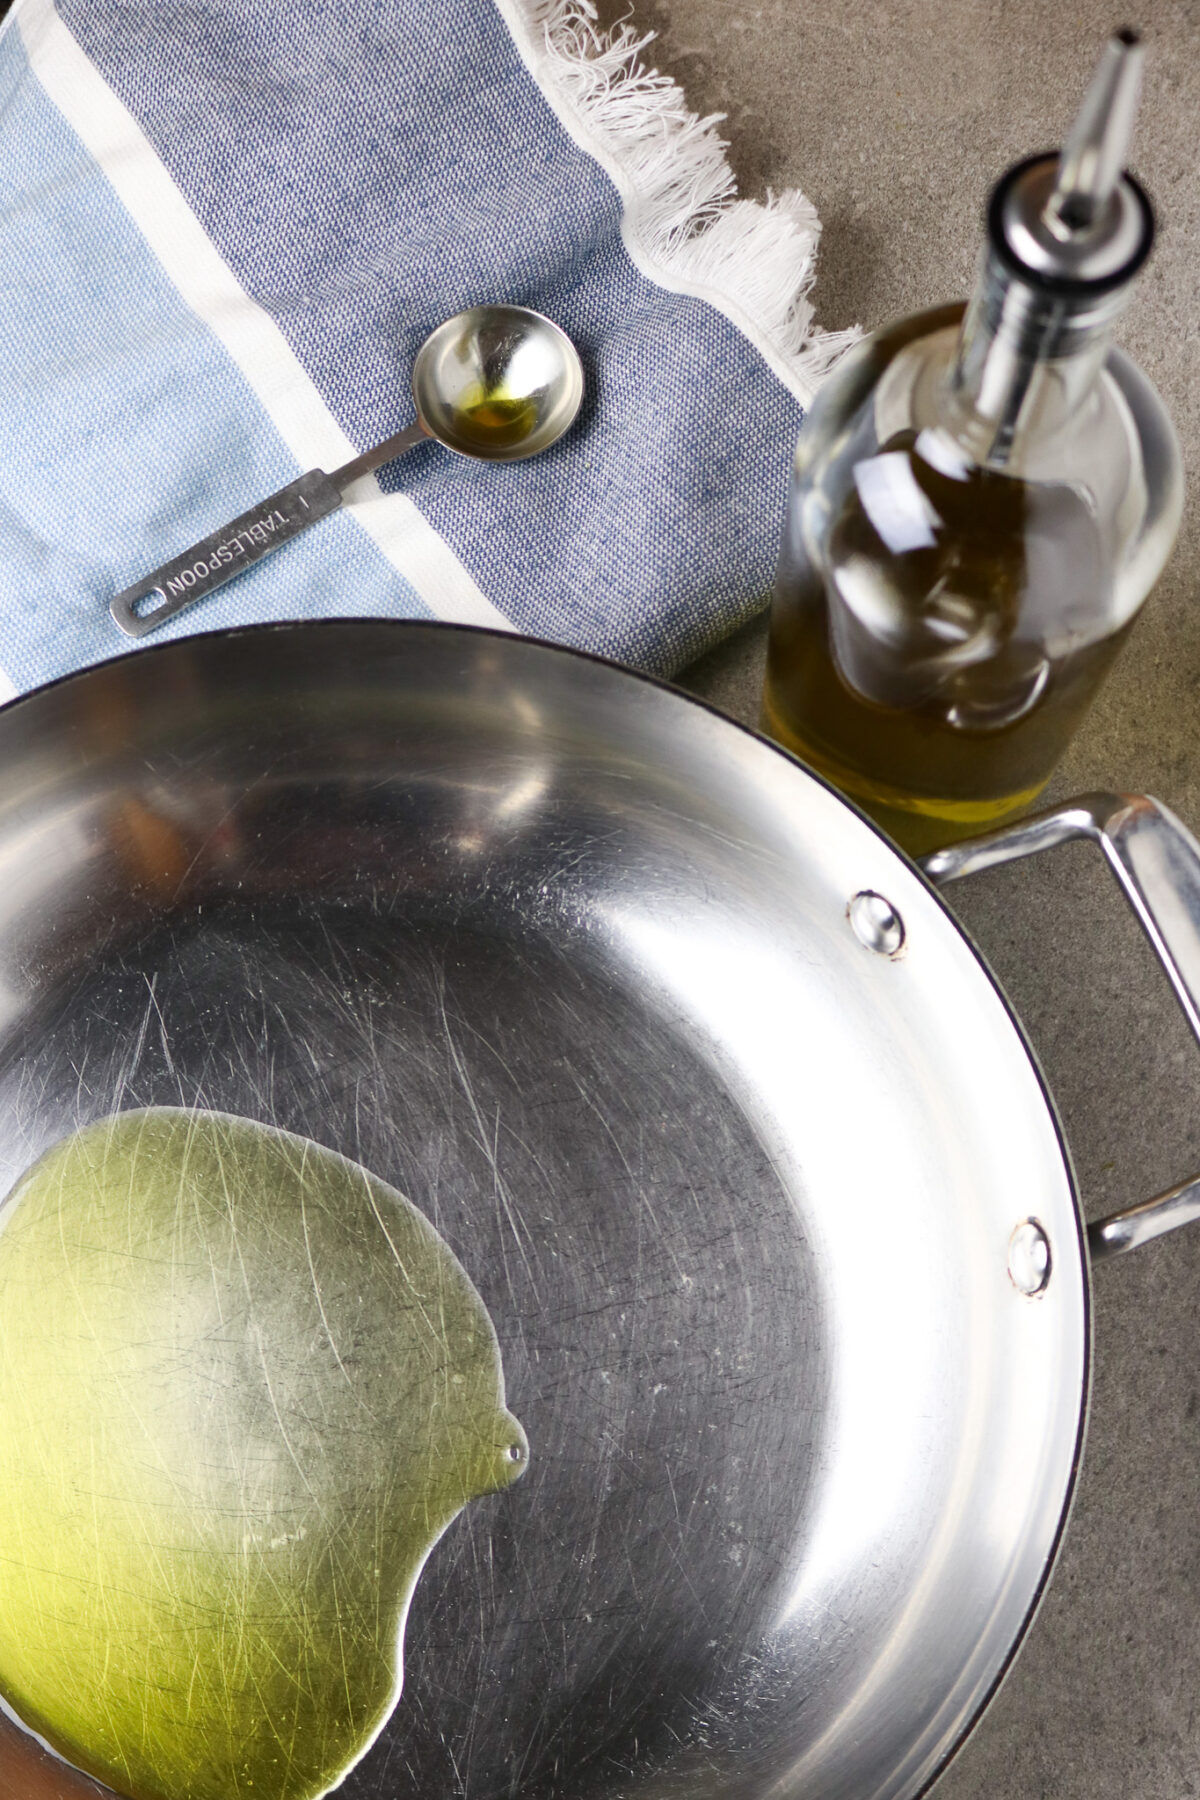 A large stainless skillet with a small amount of oil in it and a measuring spoon an a bottle of oil next to it with a blue dish towel.